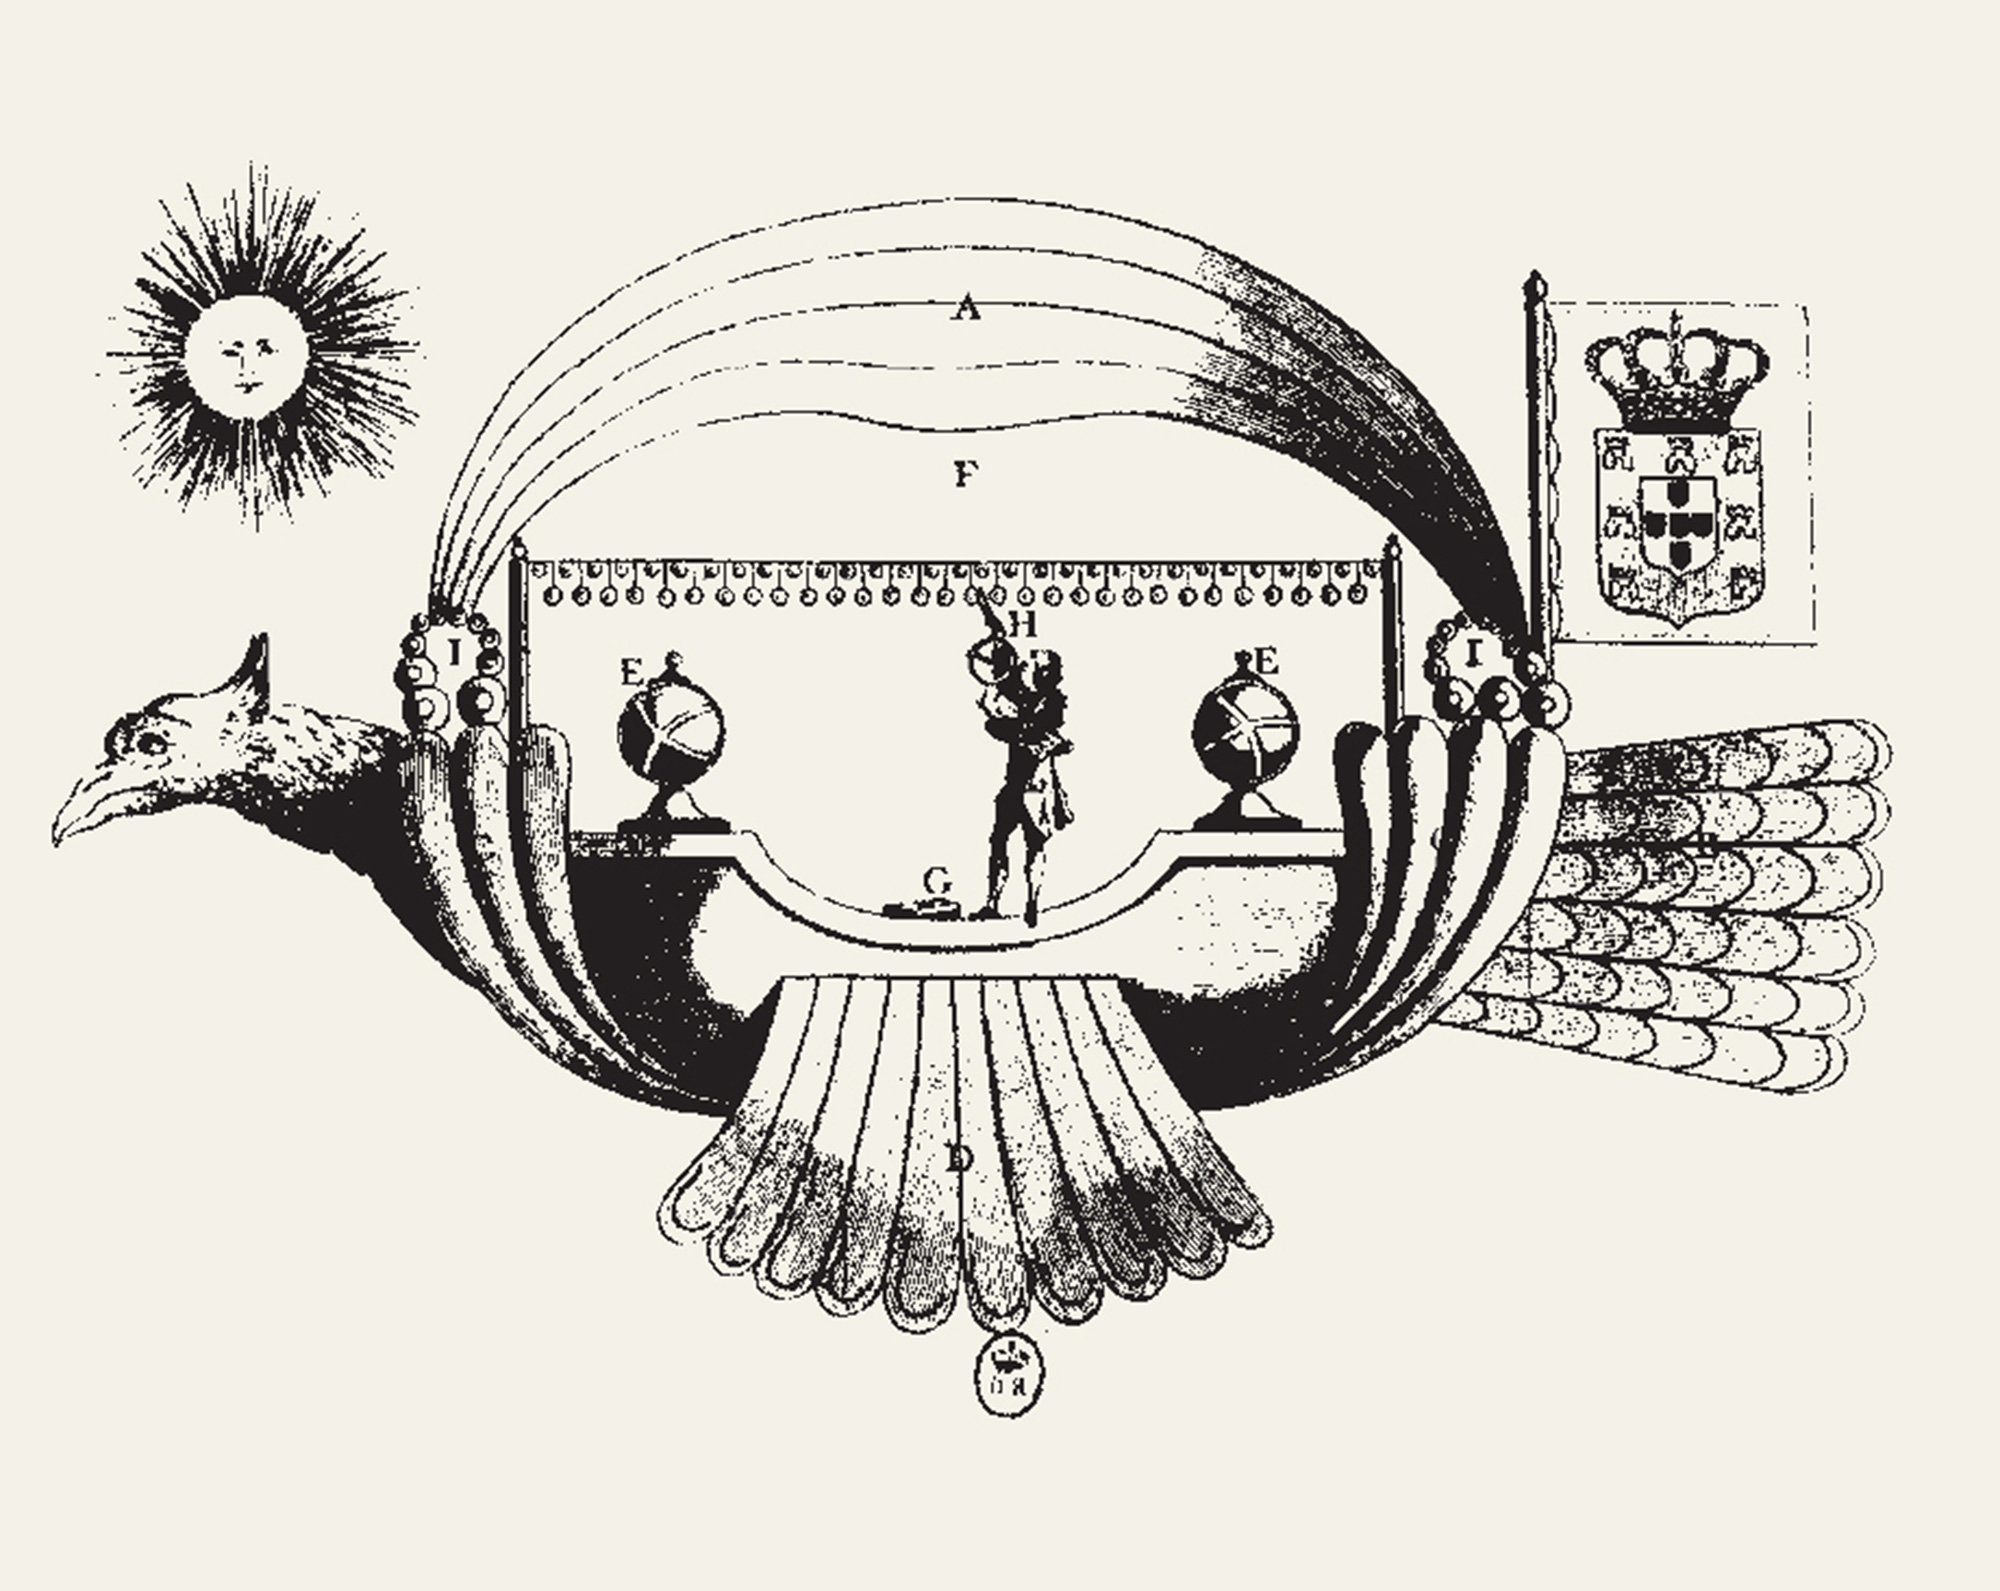 Illustration of Bartolomeo Lourenço de Gusmão’s Passarola, which was shaped like a giant bird, and held scientific instruments in the cockpit, 1709.